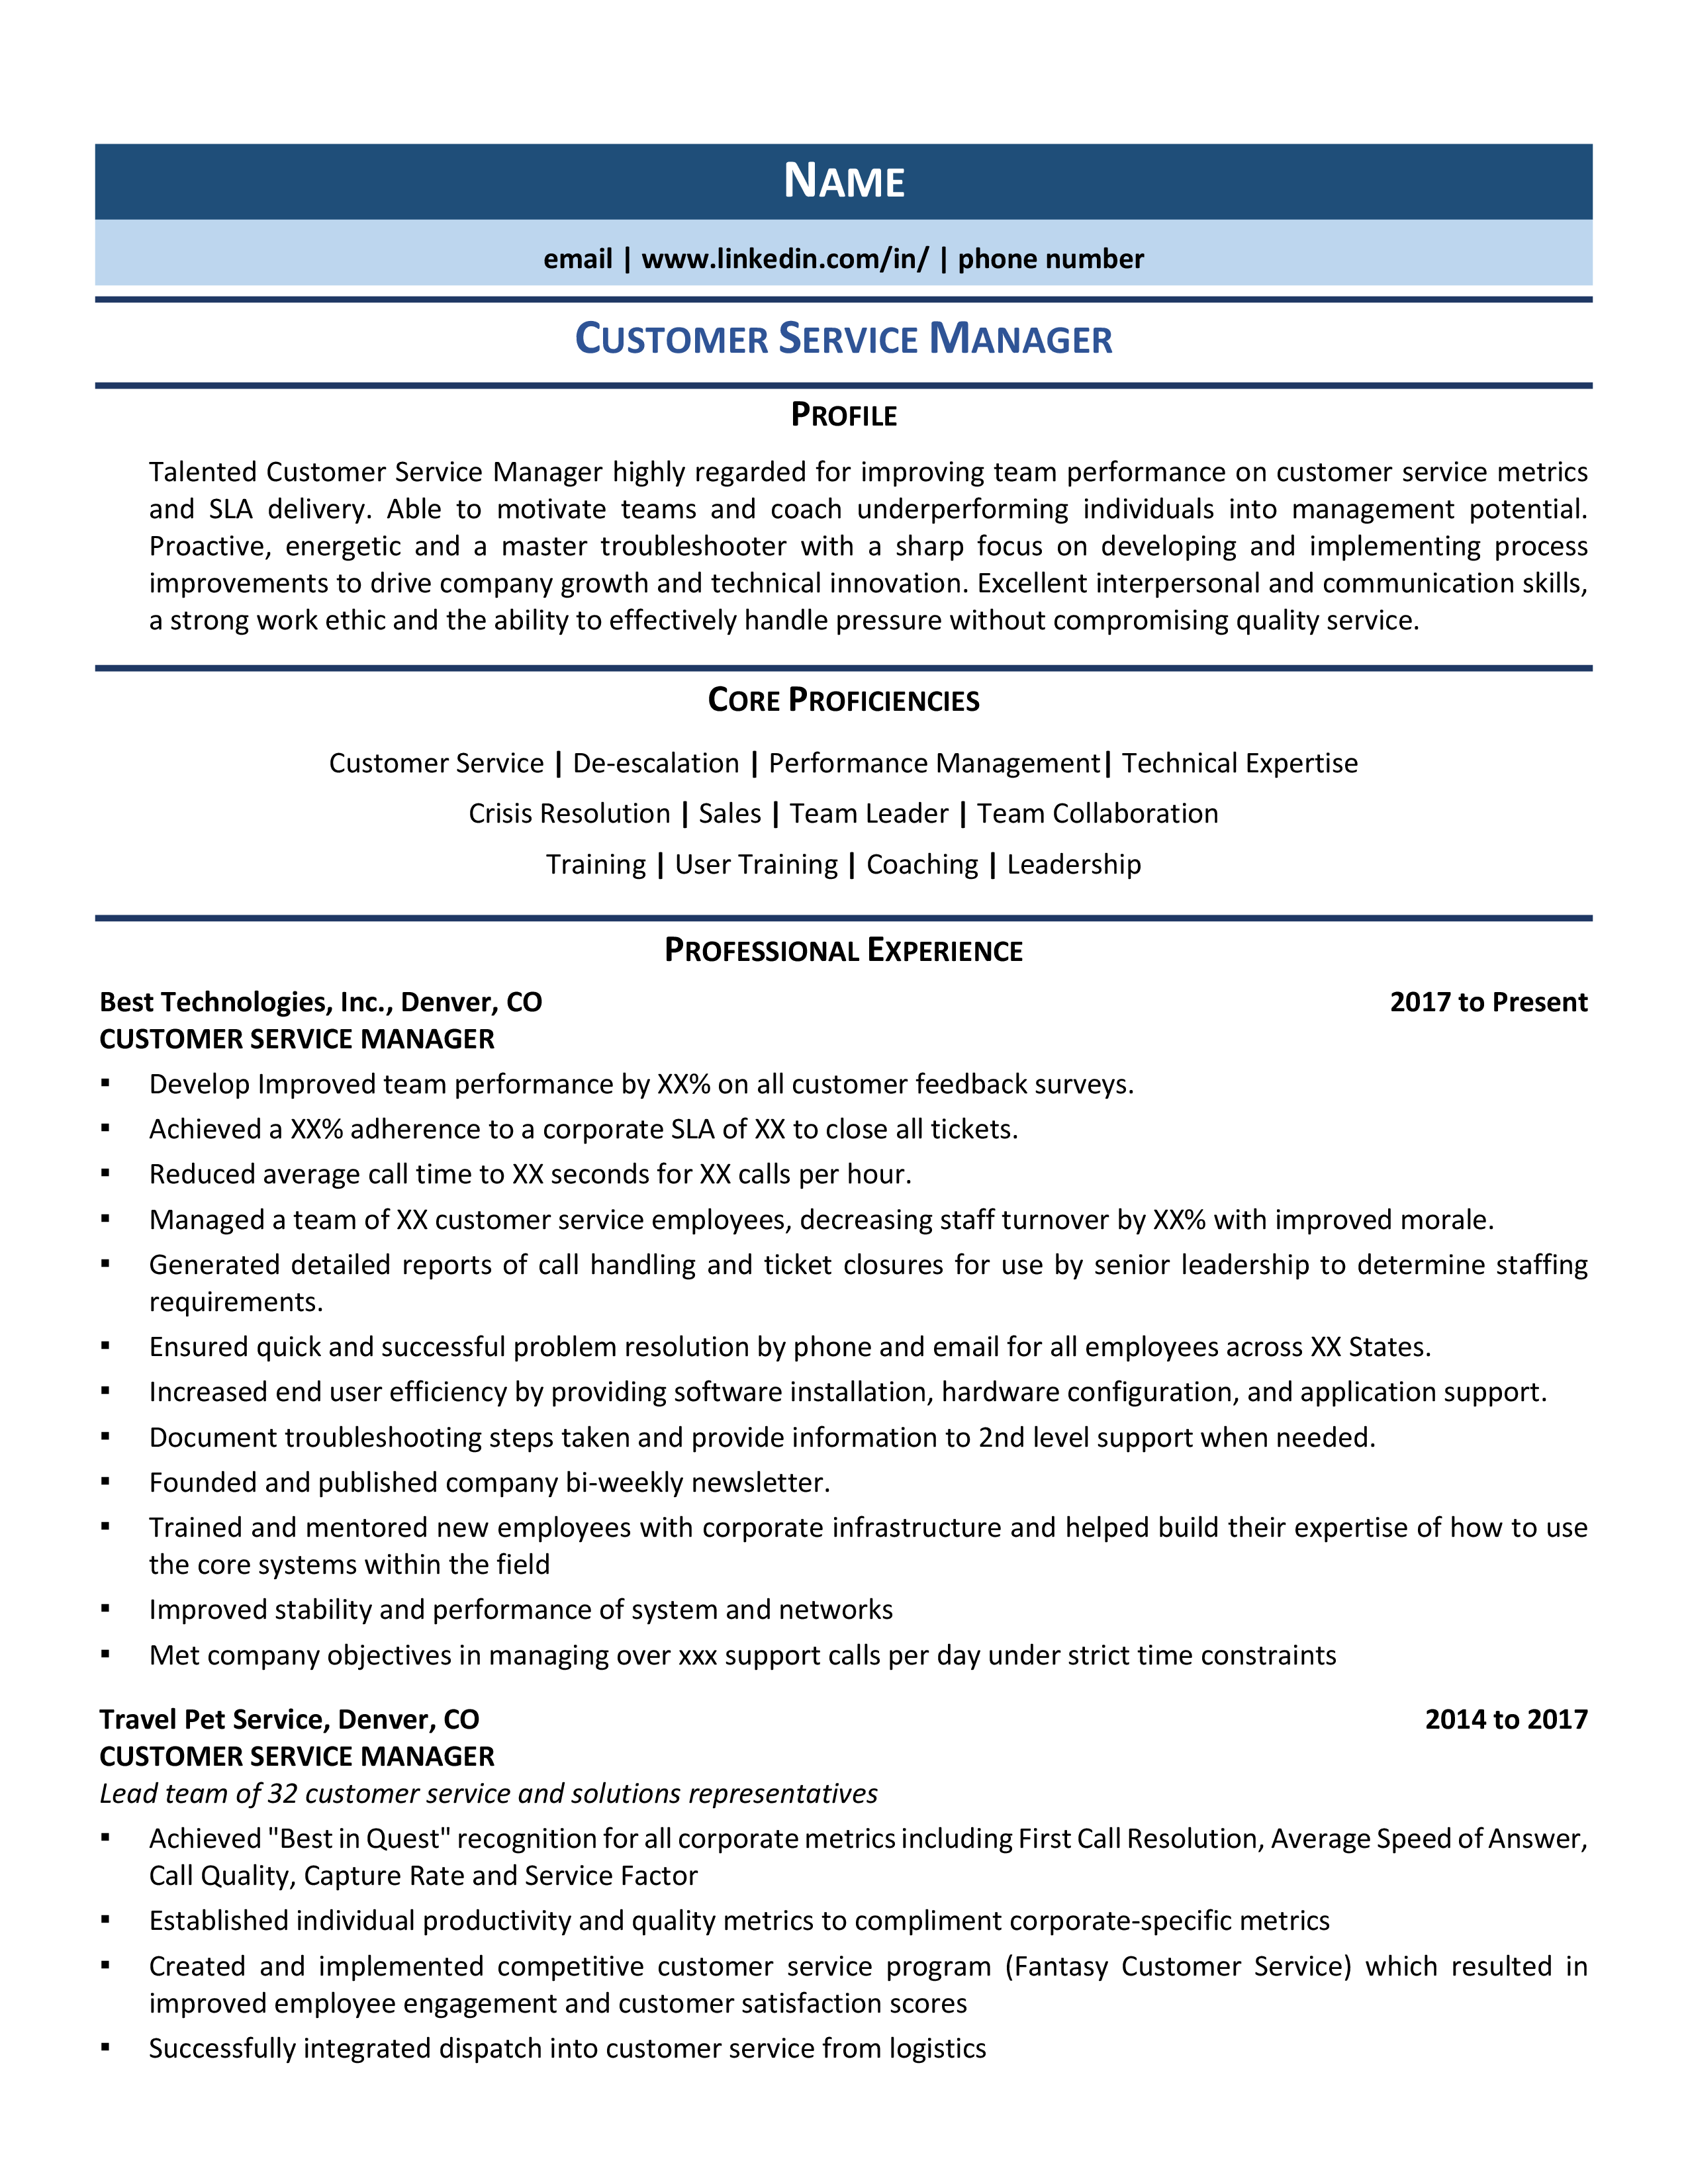 example of a resume summary for customer service